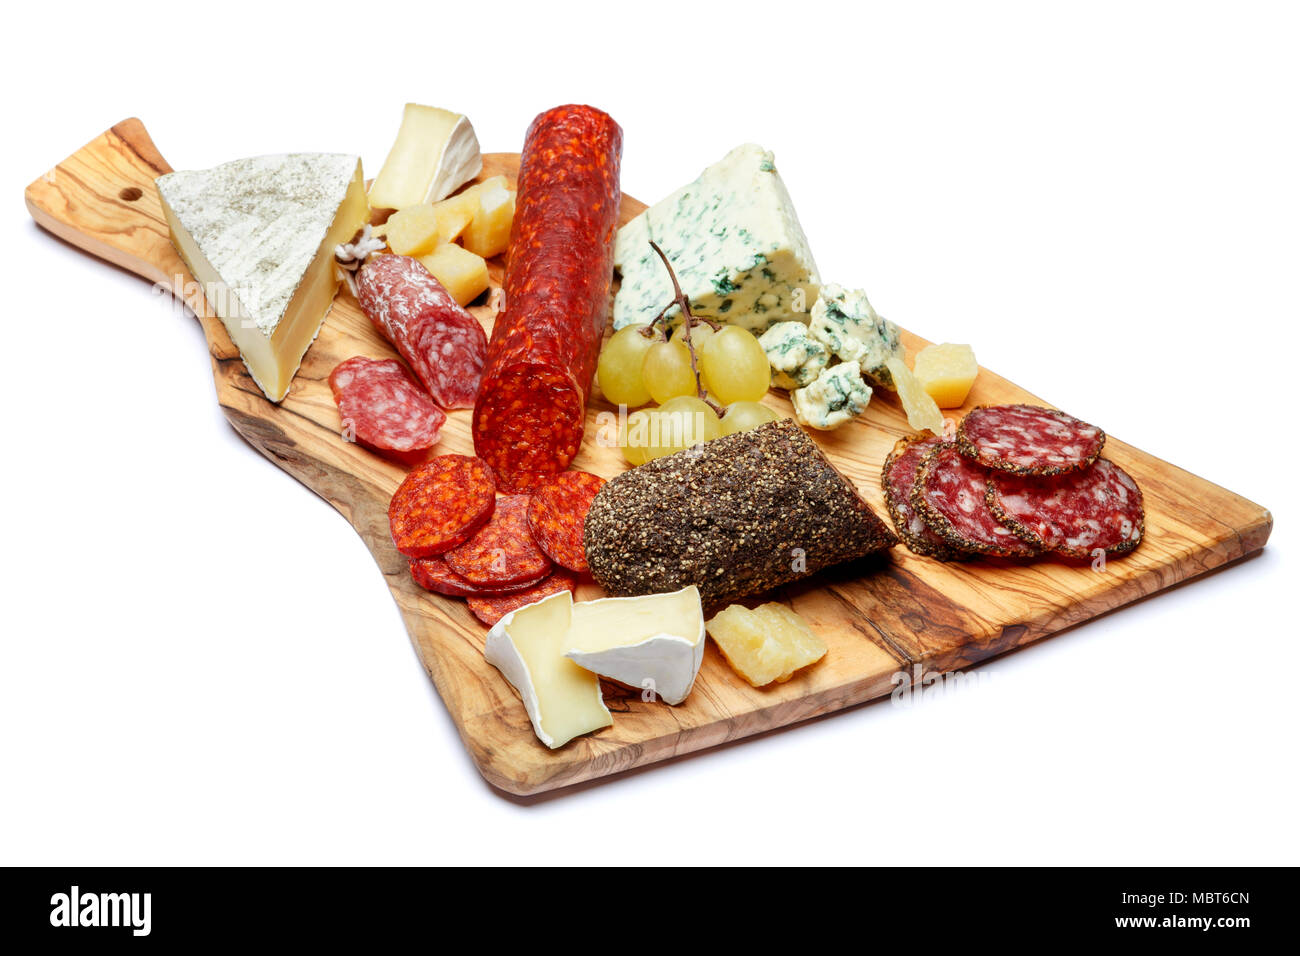 Cold meat cheese plate with salami sausage and cheese Stock Photo